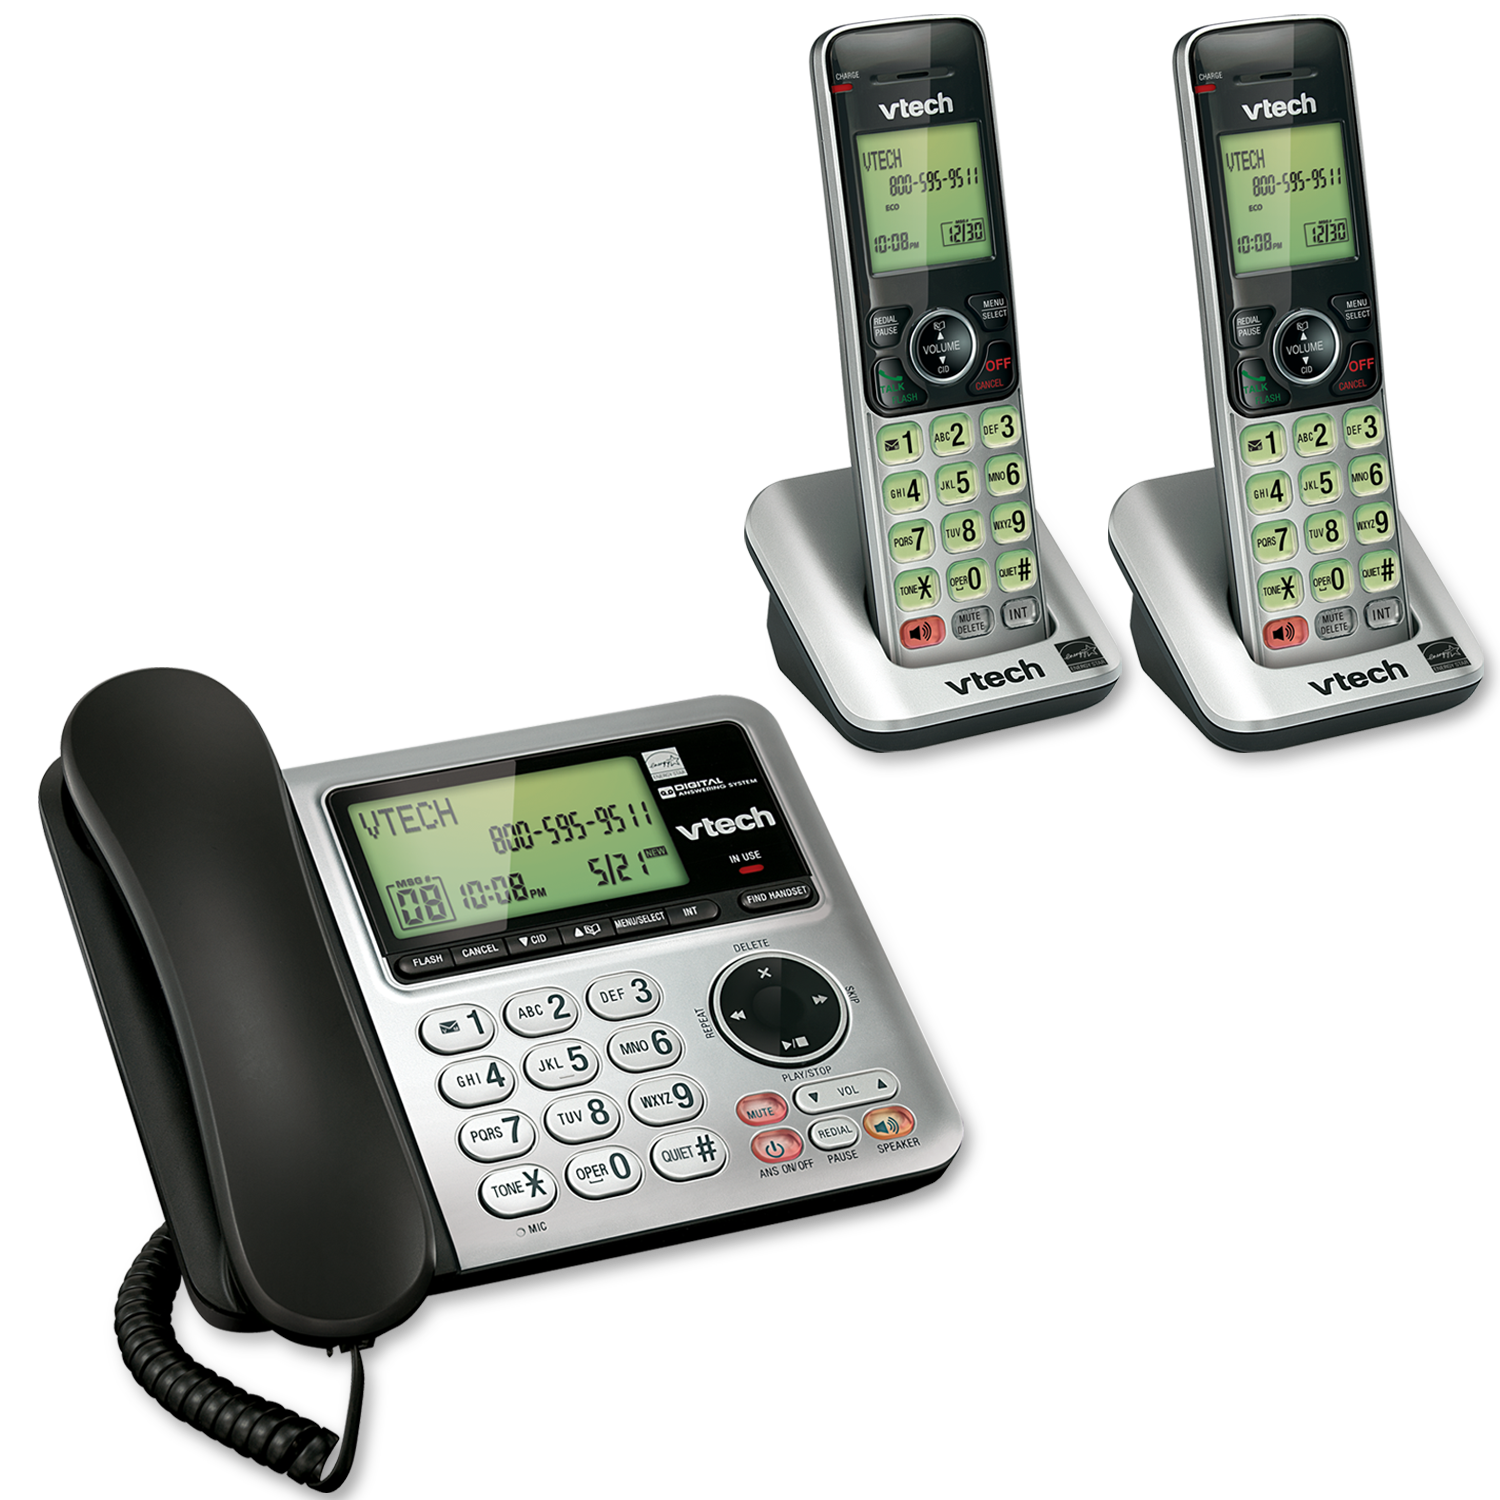 3 Handset Answering System with Caller ID/Call Waiting